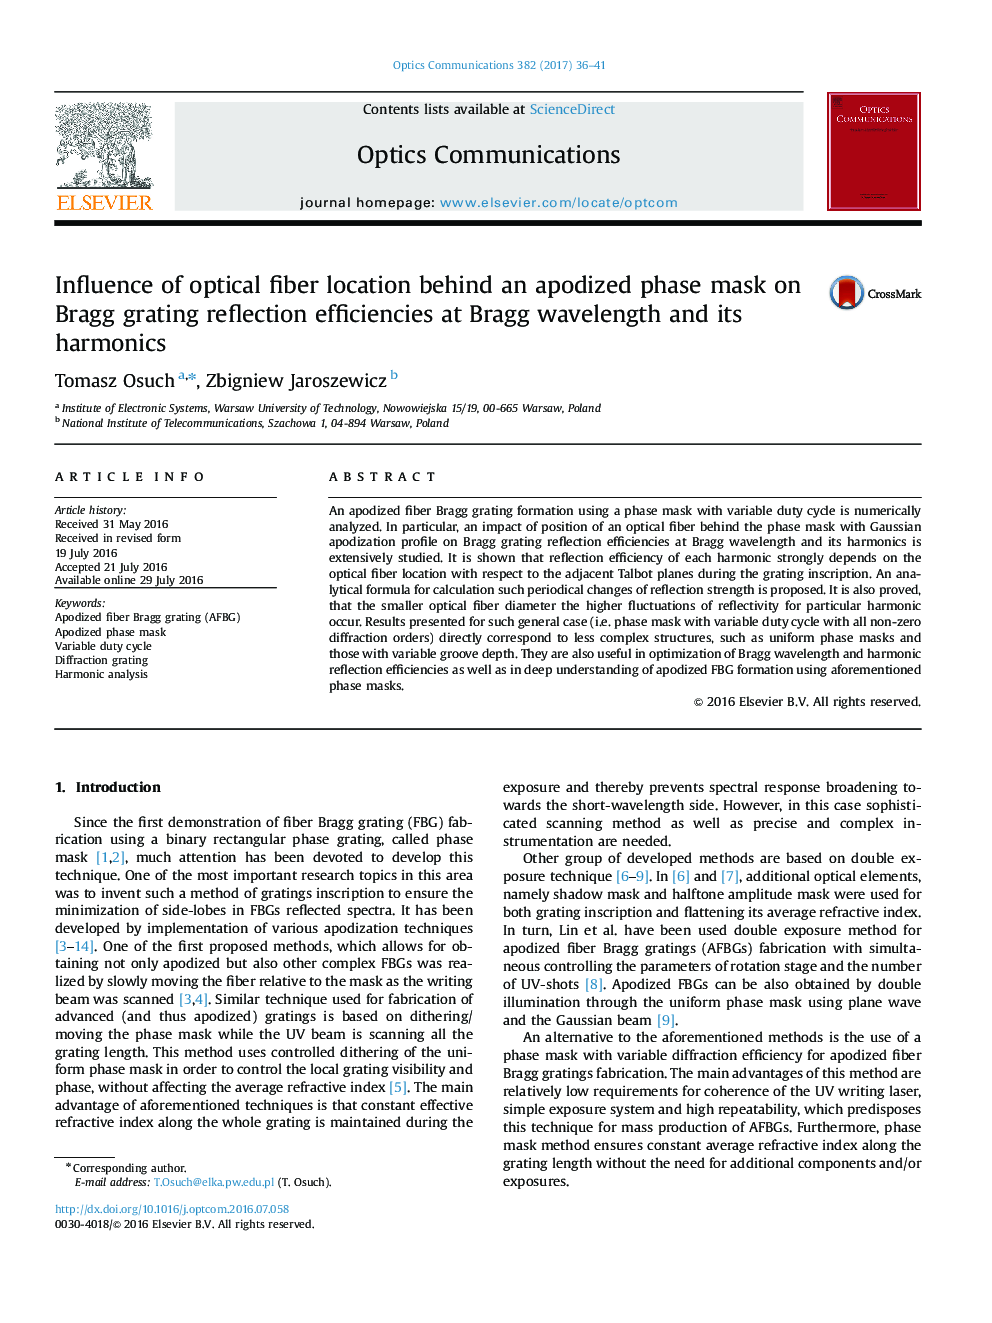 Influence of optical fiber location behind an apodized phase mask on Bragg grating reflection efficiencies at Bragg wavelength and its harmonics